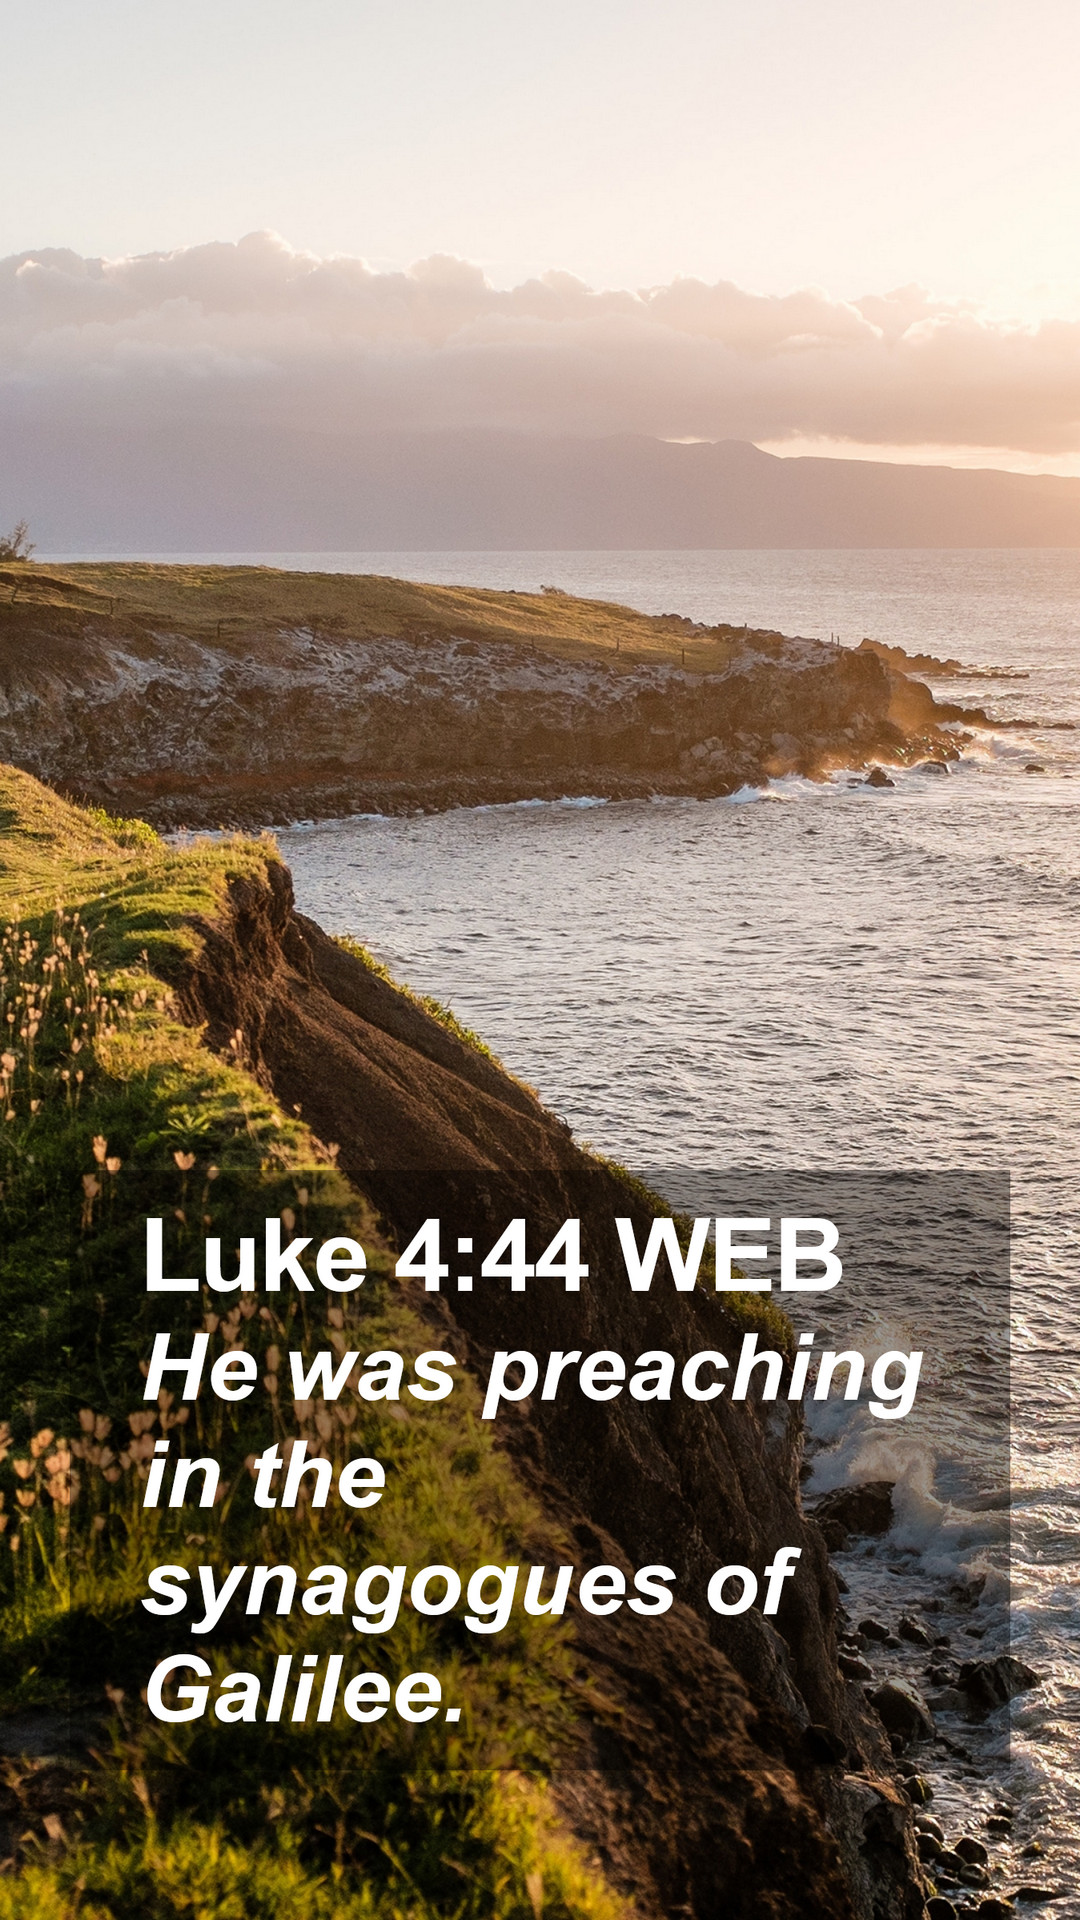 Luke 4:44 WEB Mobile Phone Wallpaper was preaching in the synagogues of